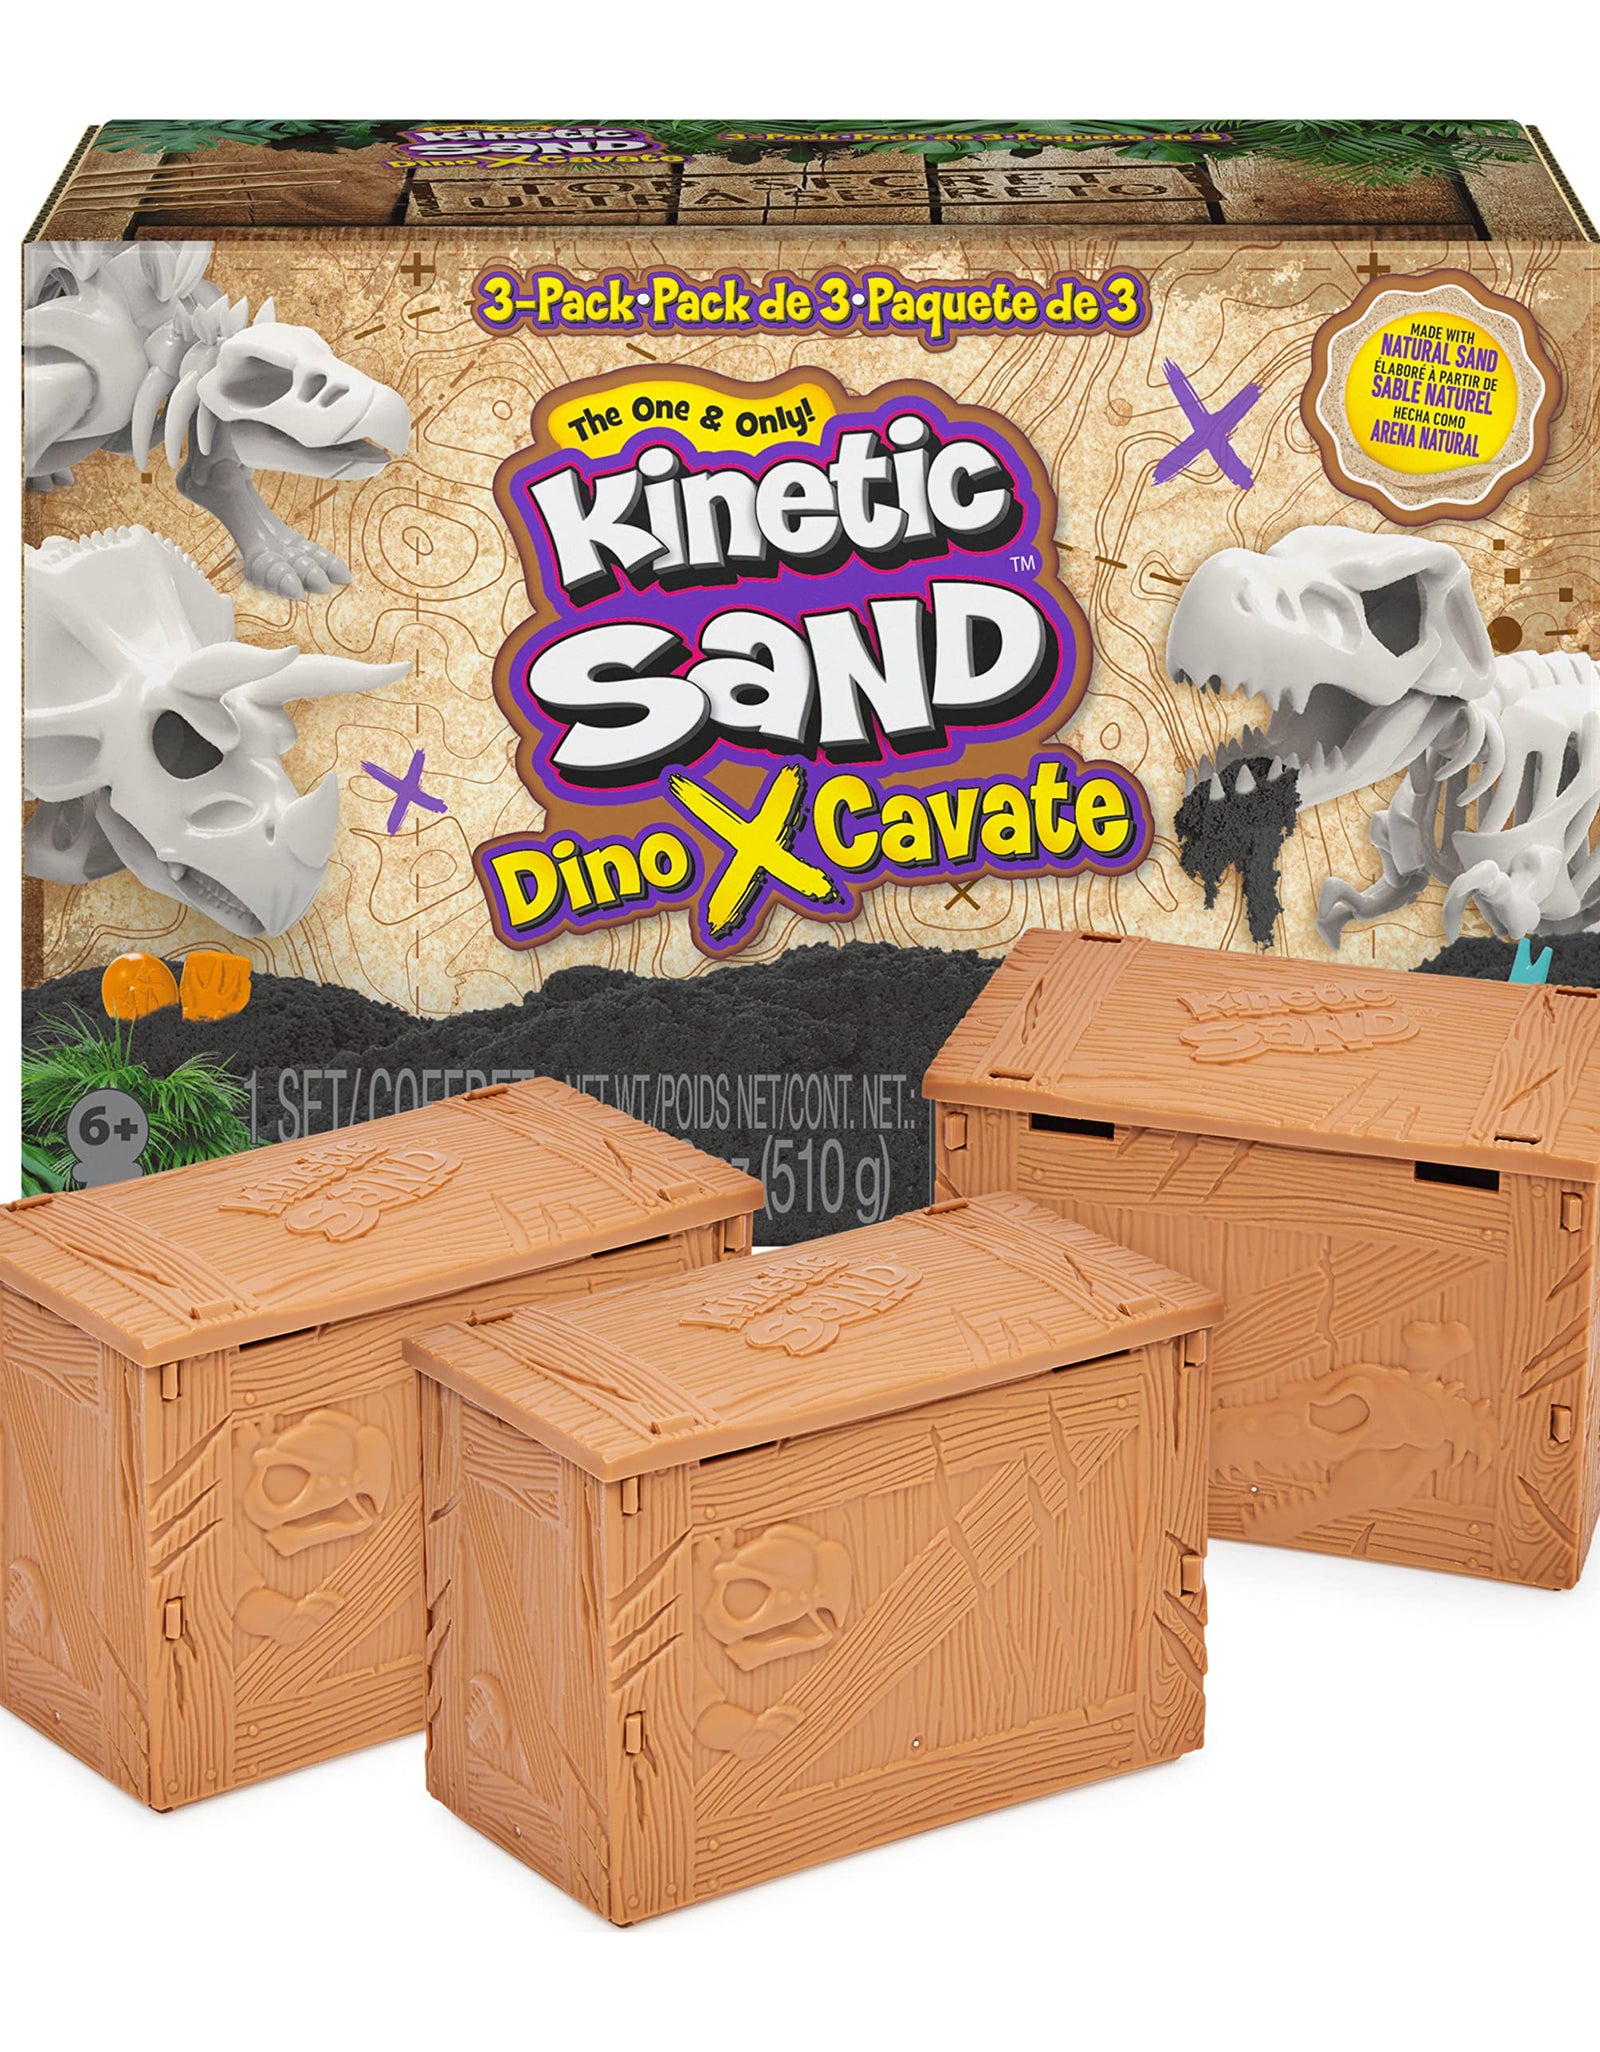 Kinetic Sand, Dino XCavate 3-Pack, Made with Natural Sand, Play Sand Sensory Toys for Kids Ages 6 and Up